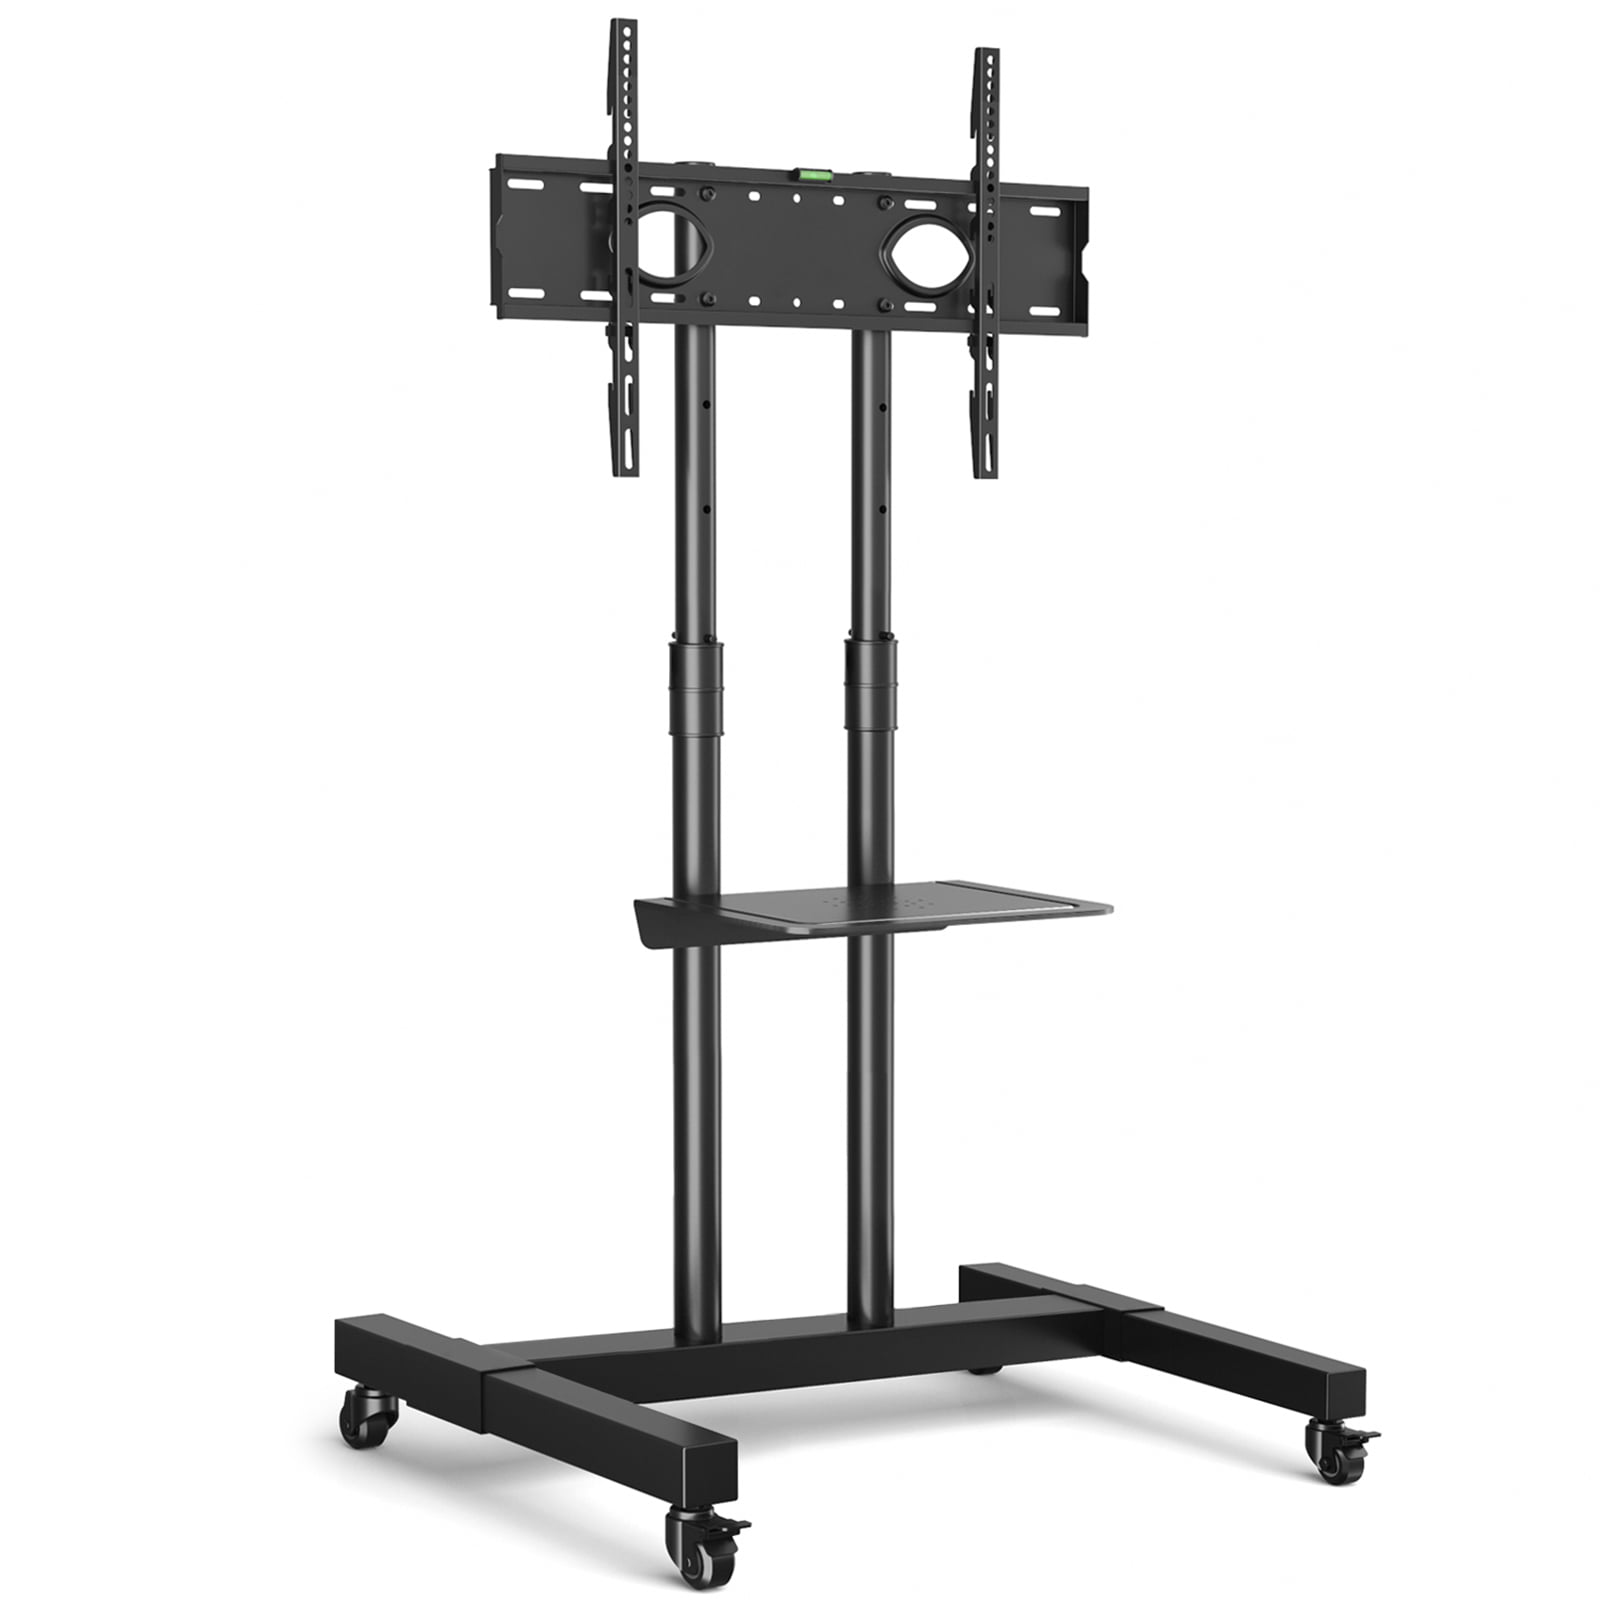 Details about   Rolling TV Stand with Lockable Caster Wheels for 32-70 inch Flat Screen TV 